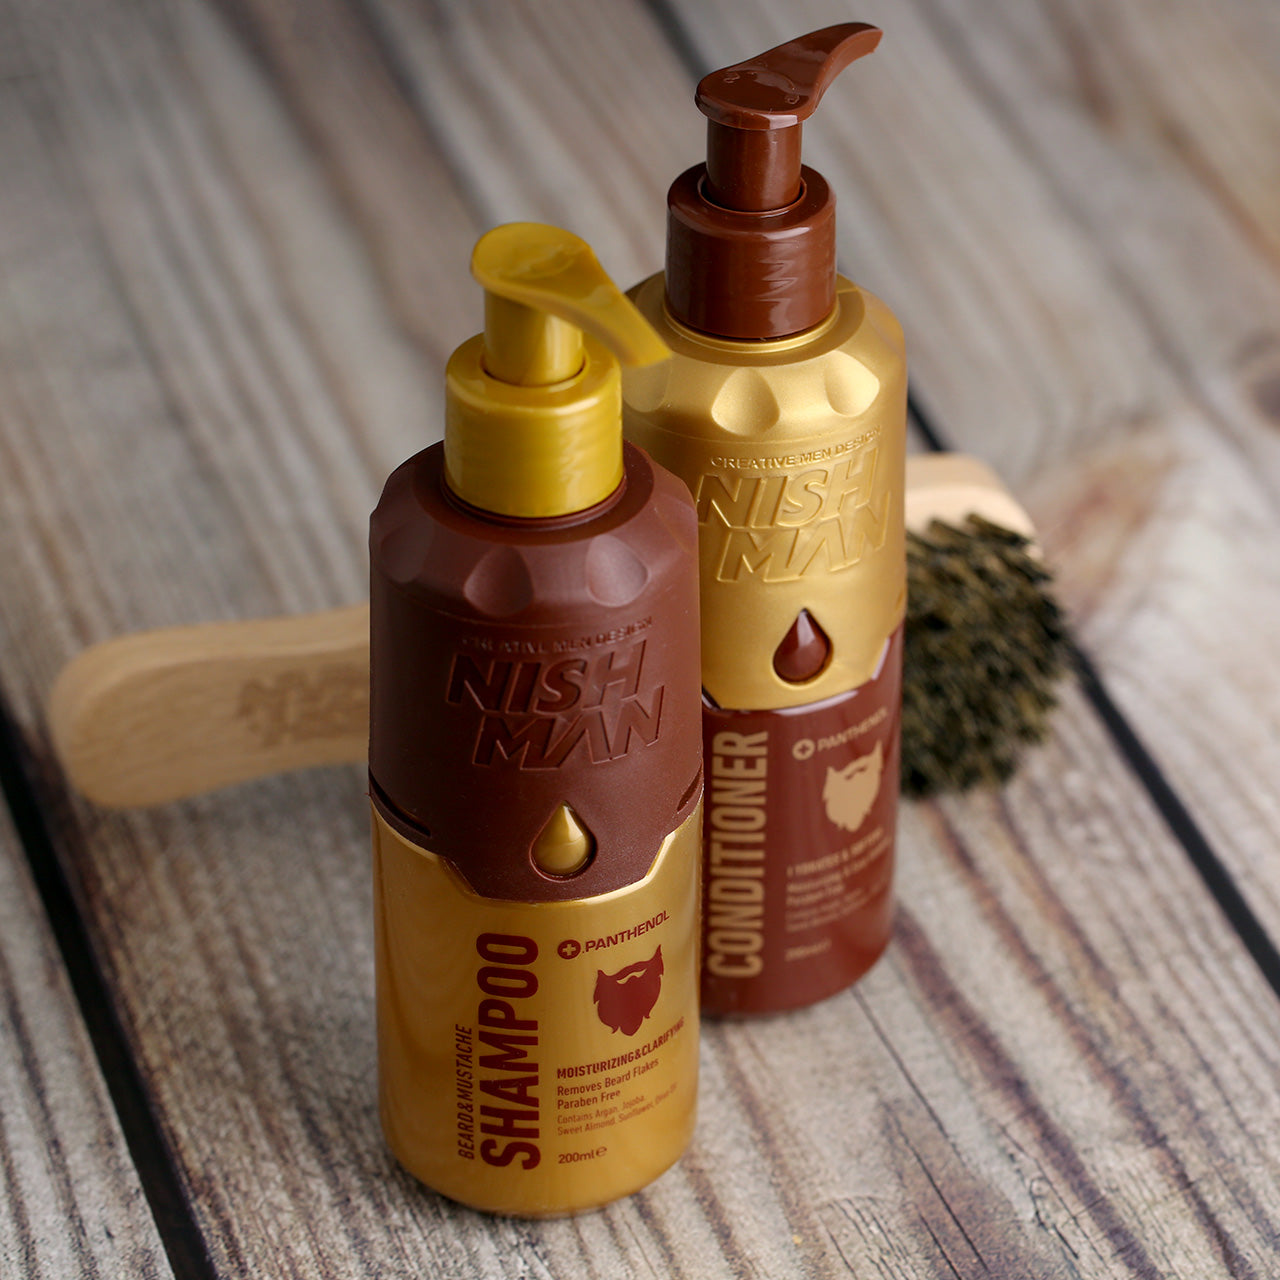 Nishman Beard & Moustache Shampoo in a gold and chocolate bottle with pump dispenser